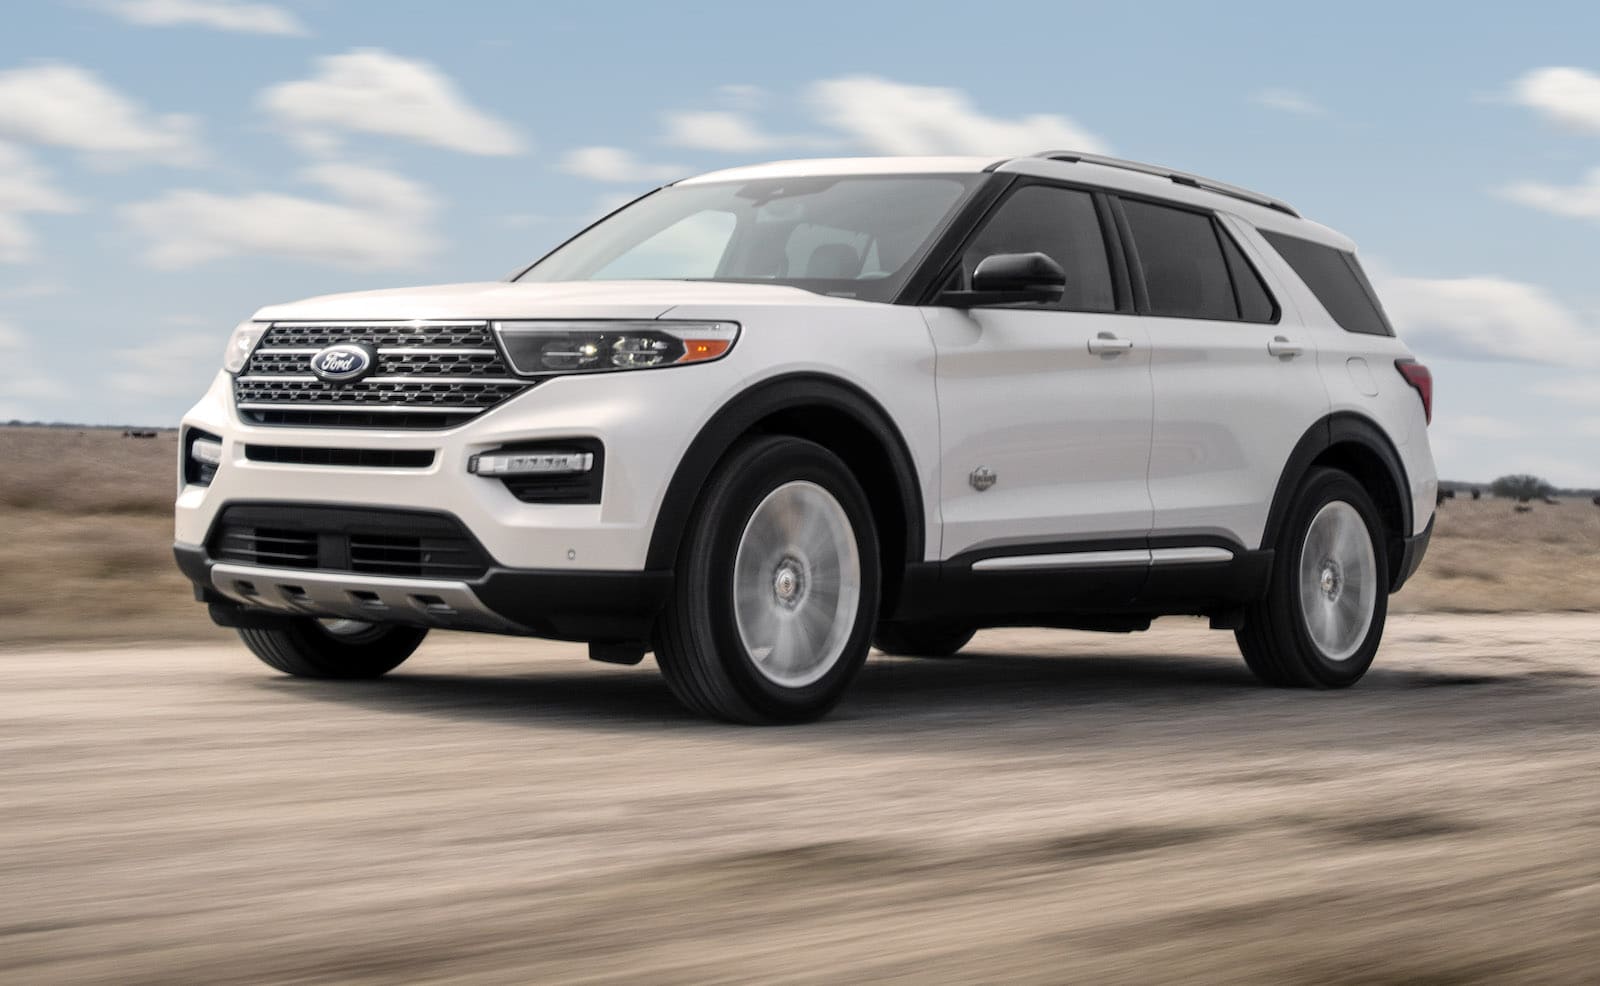 Ford Expands Explorer Offerings with New King Ranch - The Detroit Bureau